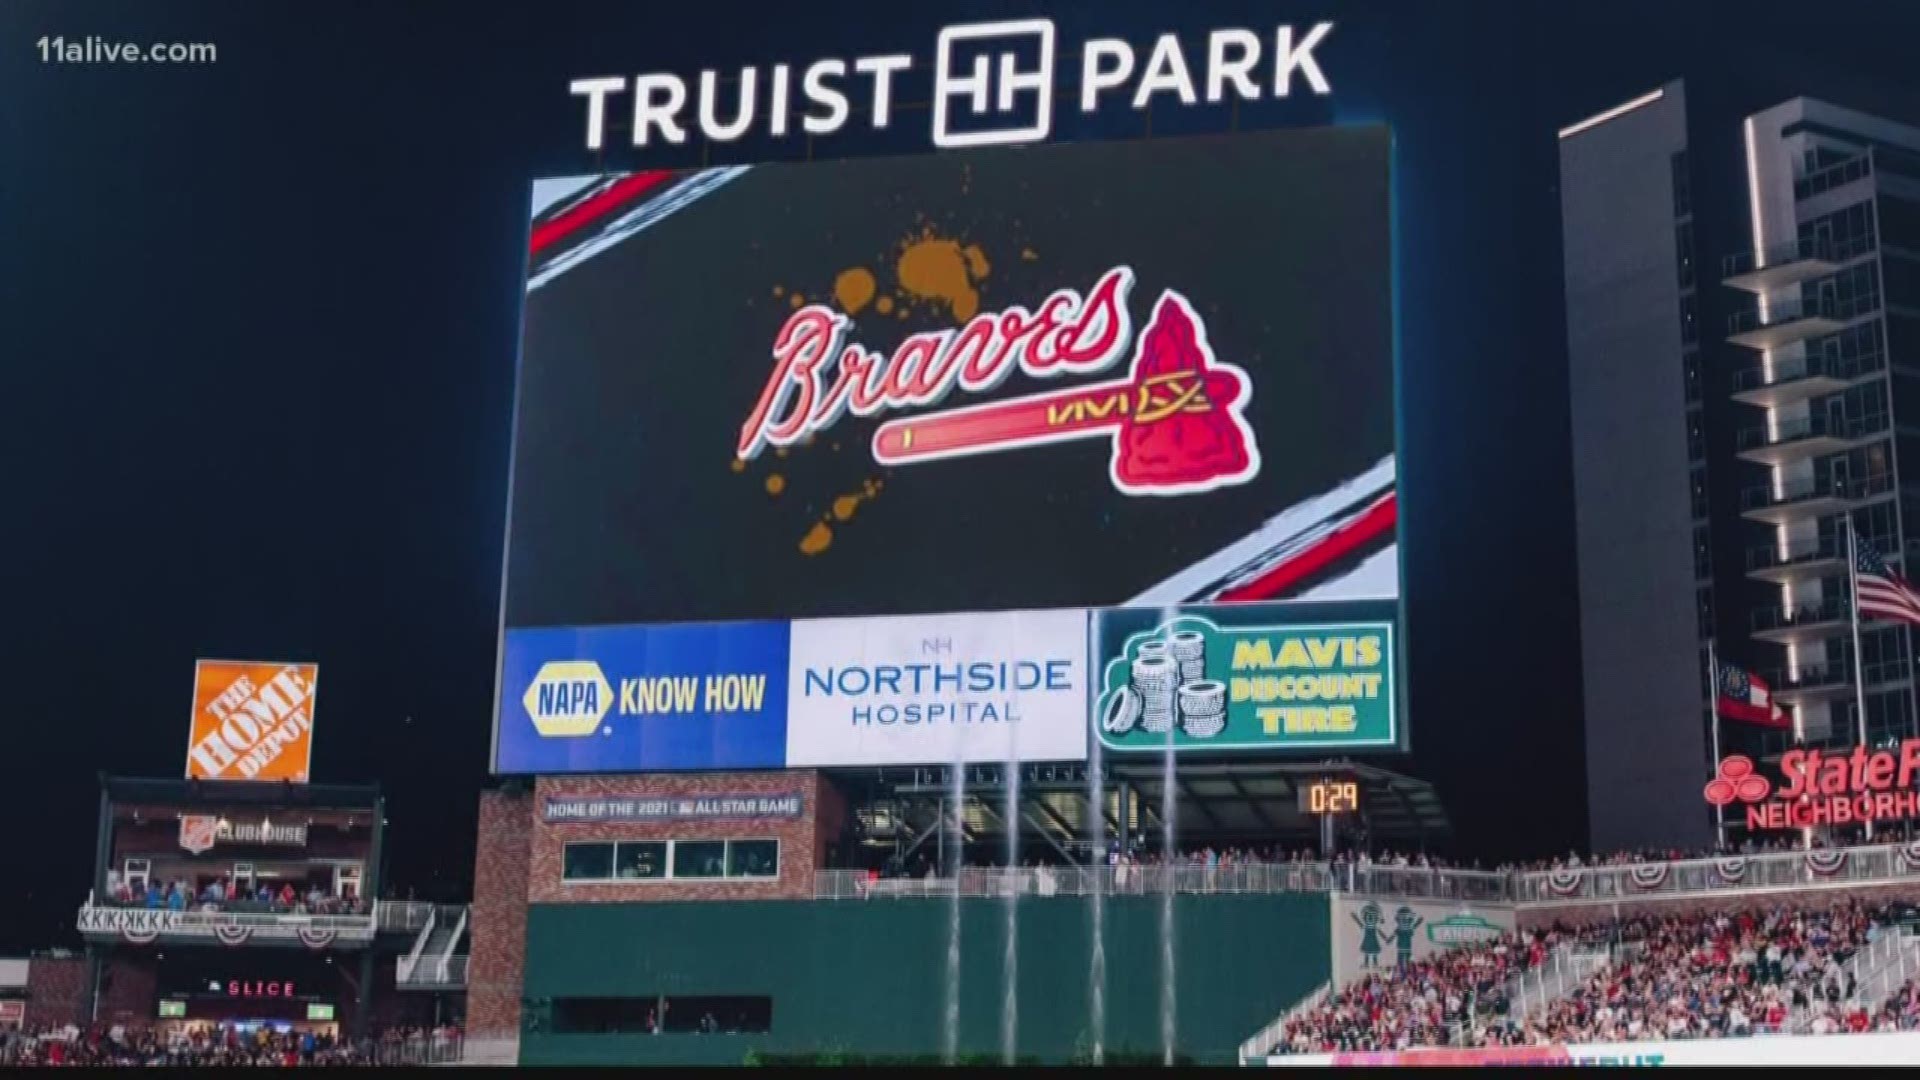 The name 'Truist Park' was unveiled Tuesday as the new home of the Braves.